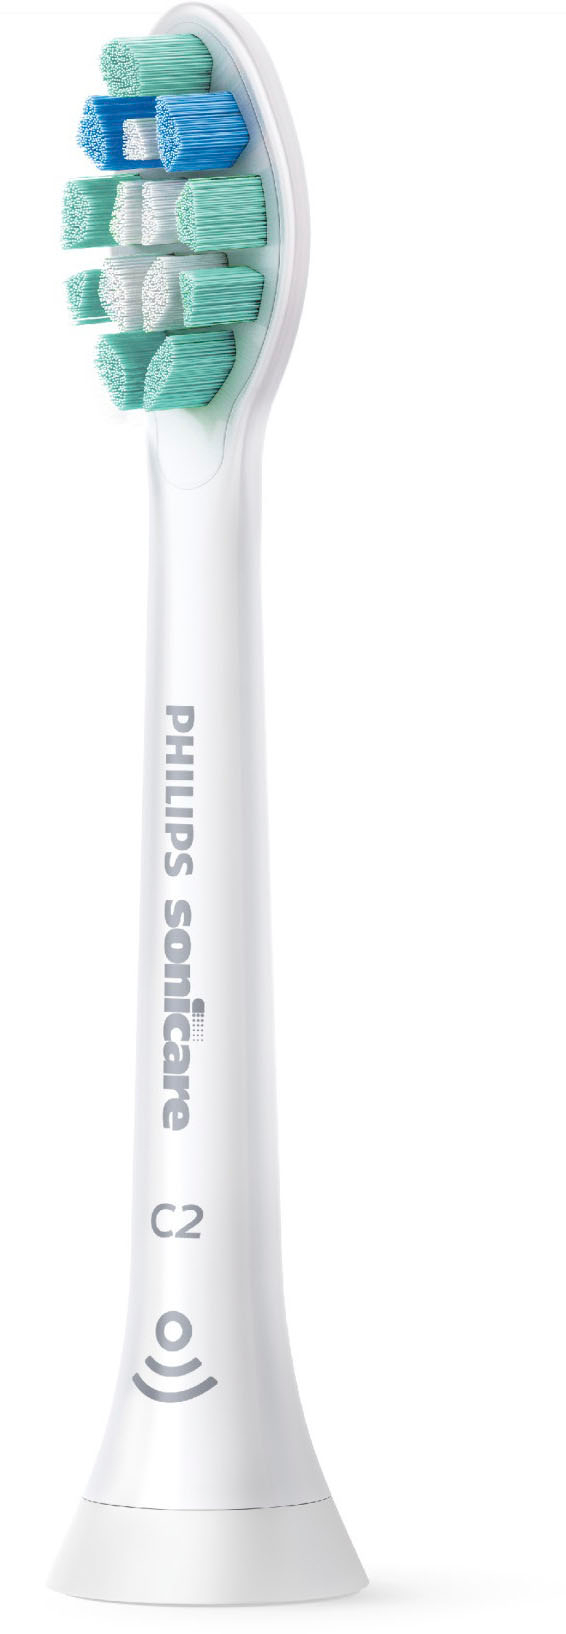 Left View: Philips Sonicare - ProtectiveClean 4100 - White